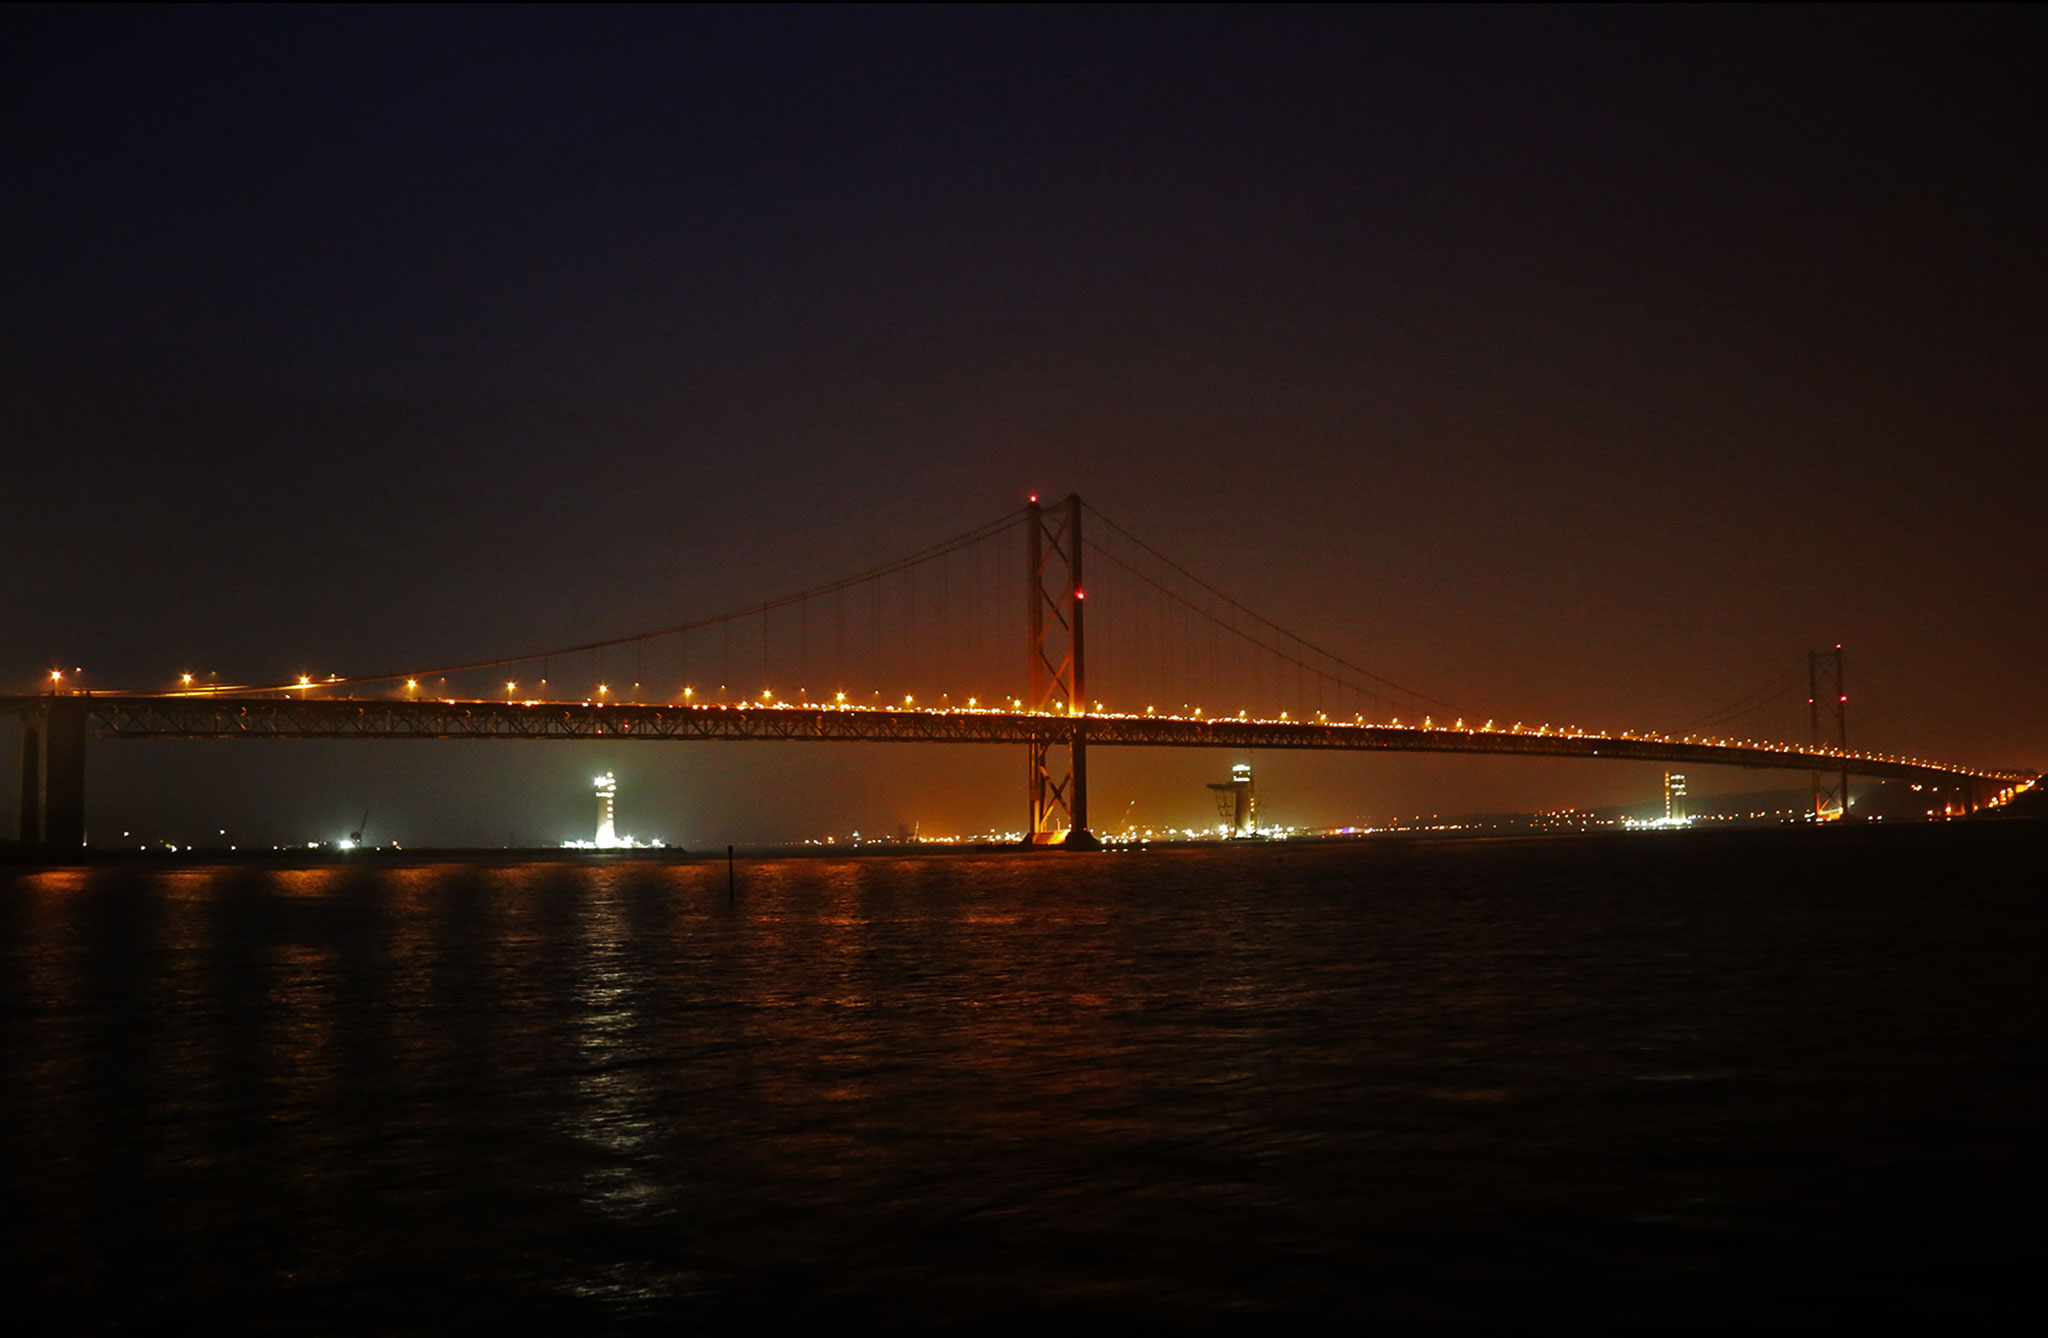 Forth Road Bridge 50th Anniversary Celebrations, September 2014  - The Torchlight Procession across the Forth Road Bridge